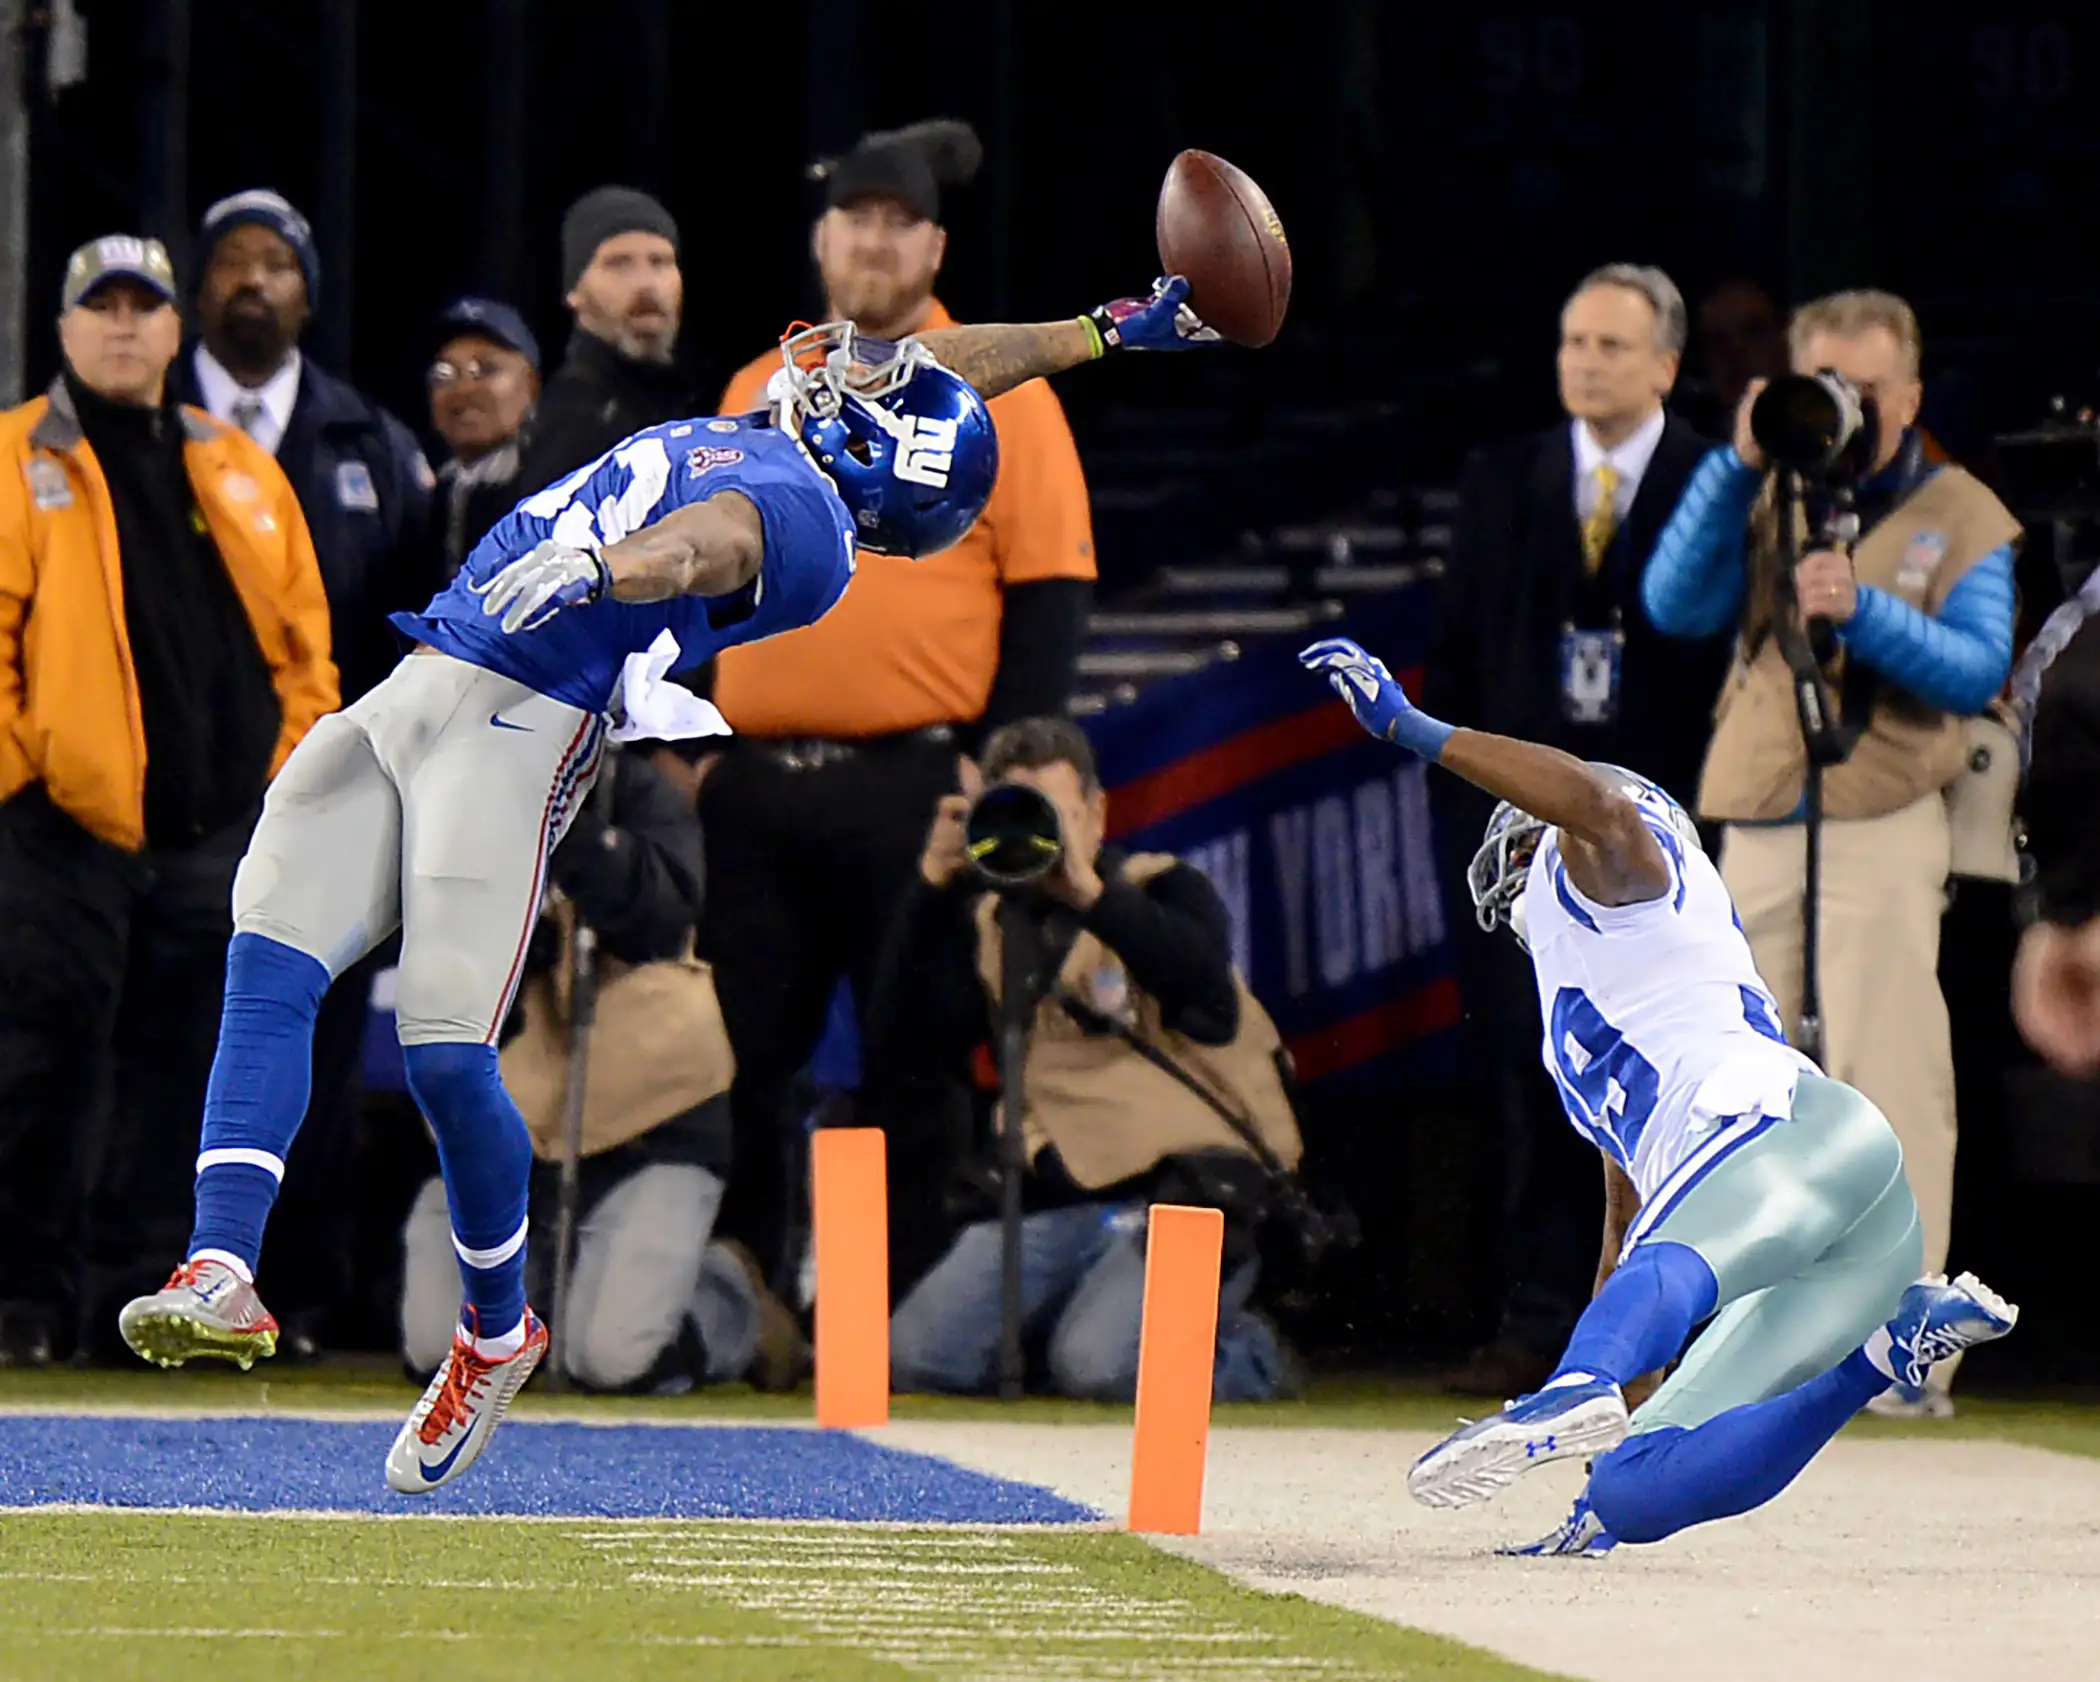 New York Giants wide receiver Odell Beckham makes stunning touchdown catch in the first half during game against the Dallas Cowboys. Sunday, November 23, 2014 at the MetLife Stadium in East Rutherford, New Jersey.